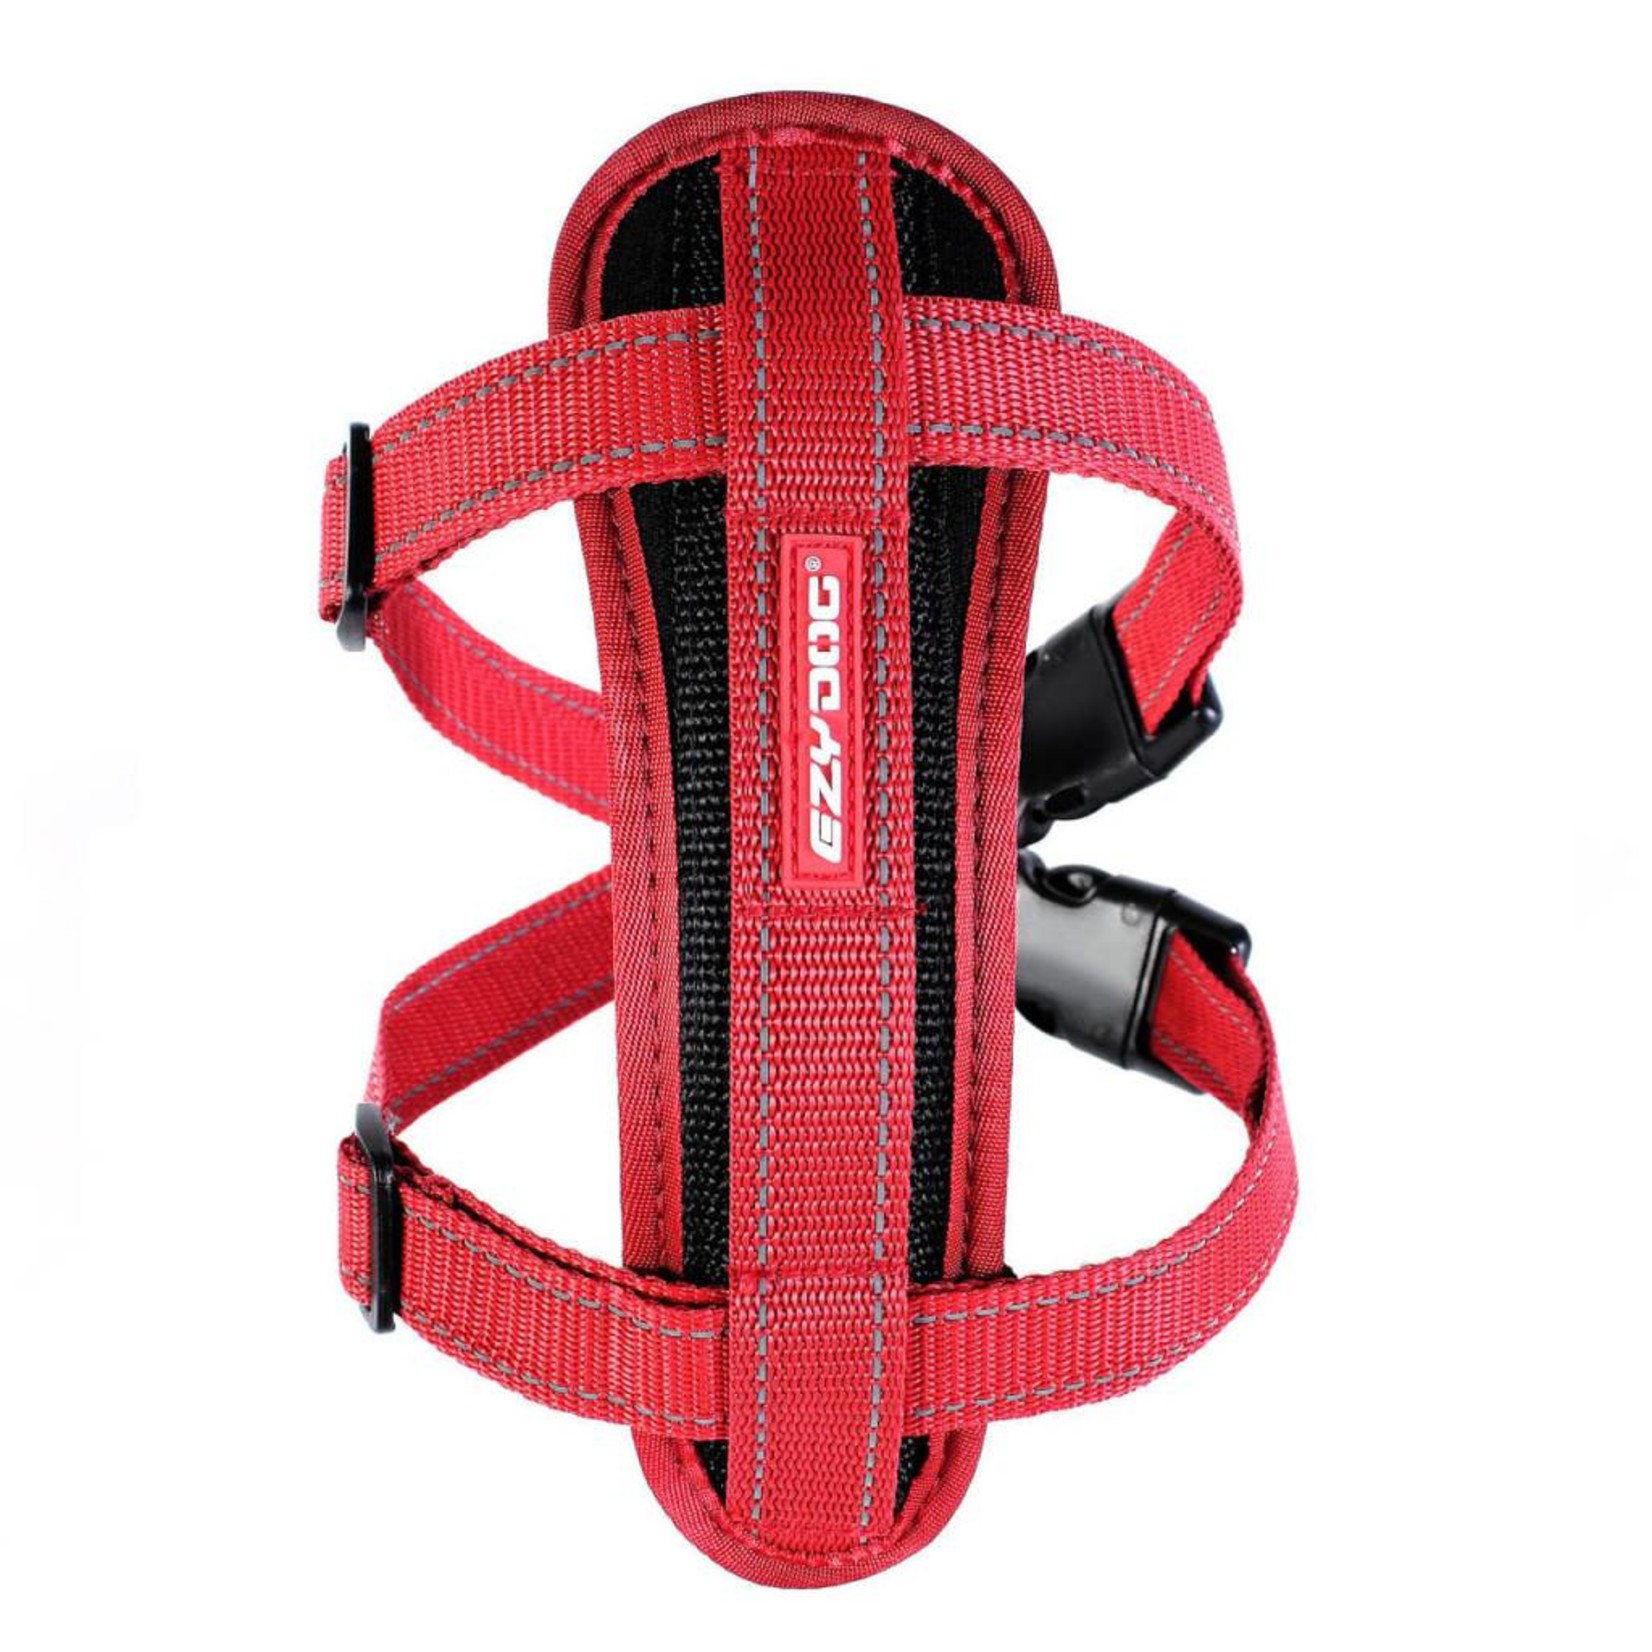 EzyDog Chest Plate Dog Harness with Seat Belt Loop, Red